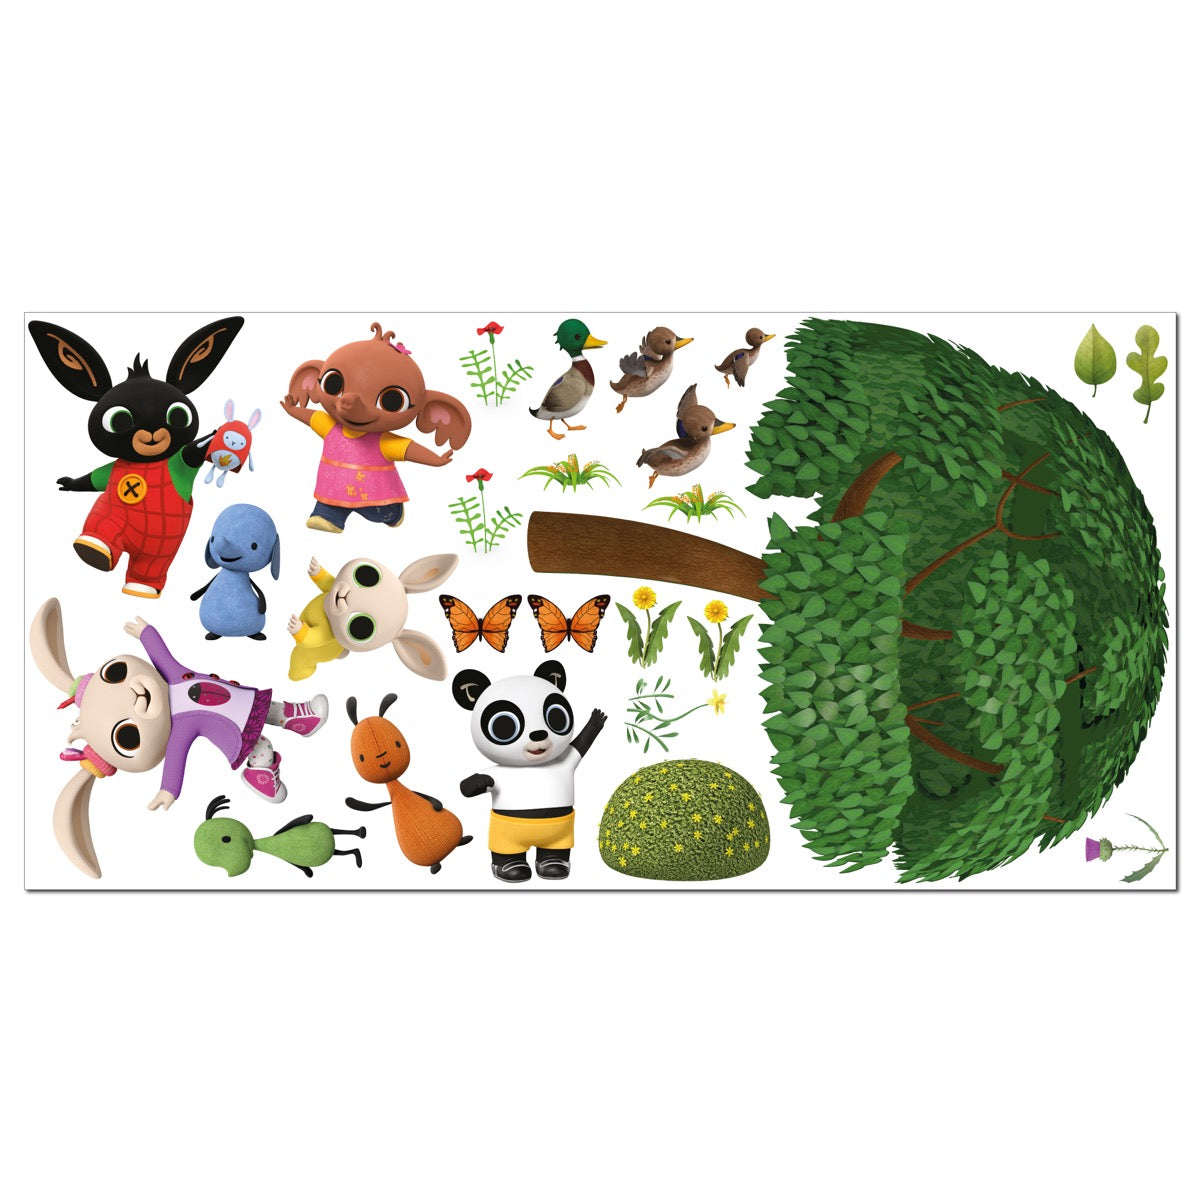 Bing Wall Sticker - Bing and Friends Outside Nature Wall Decal Set